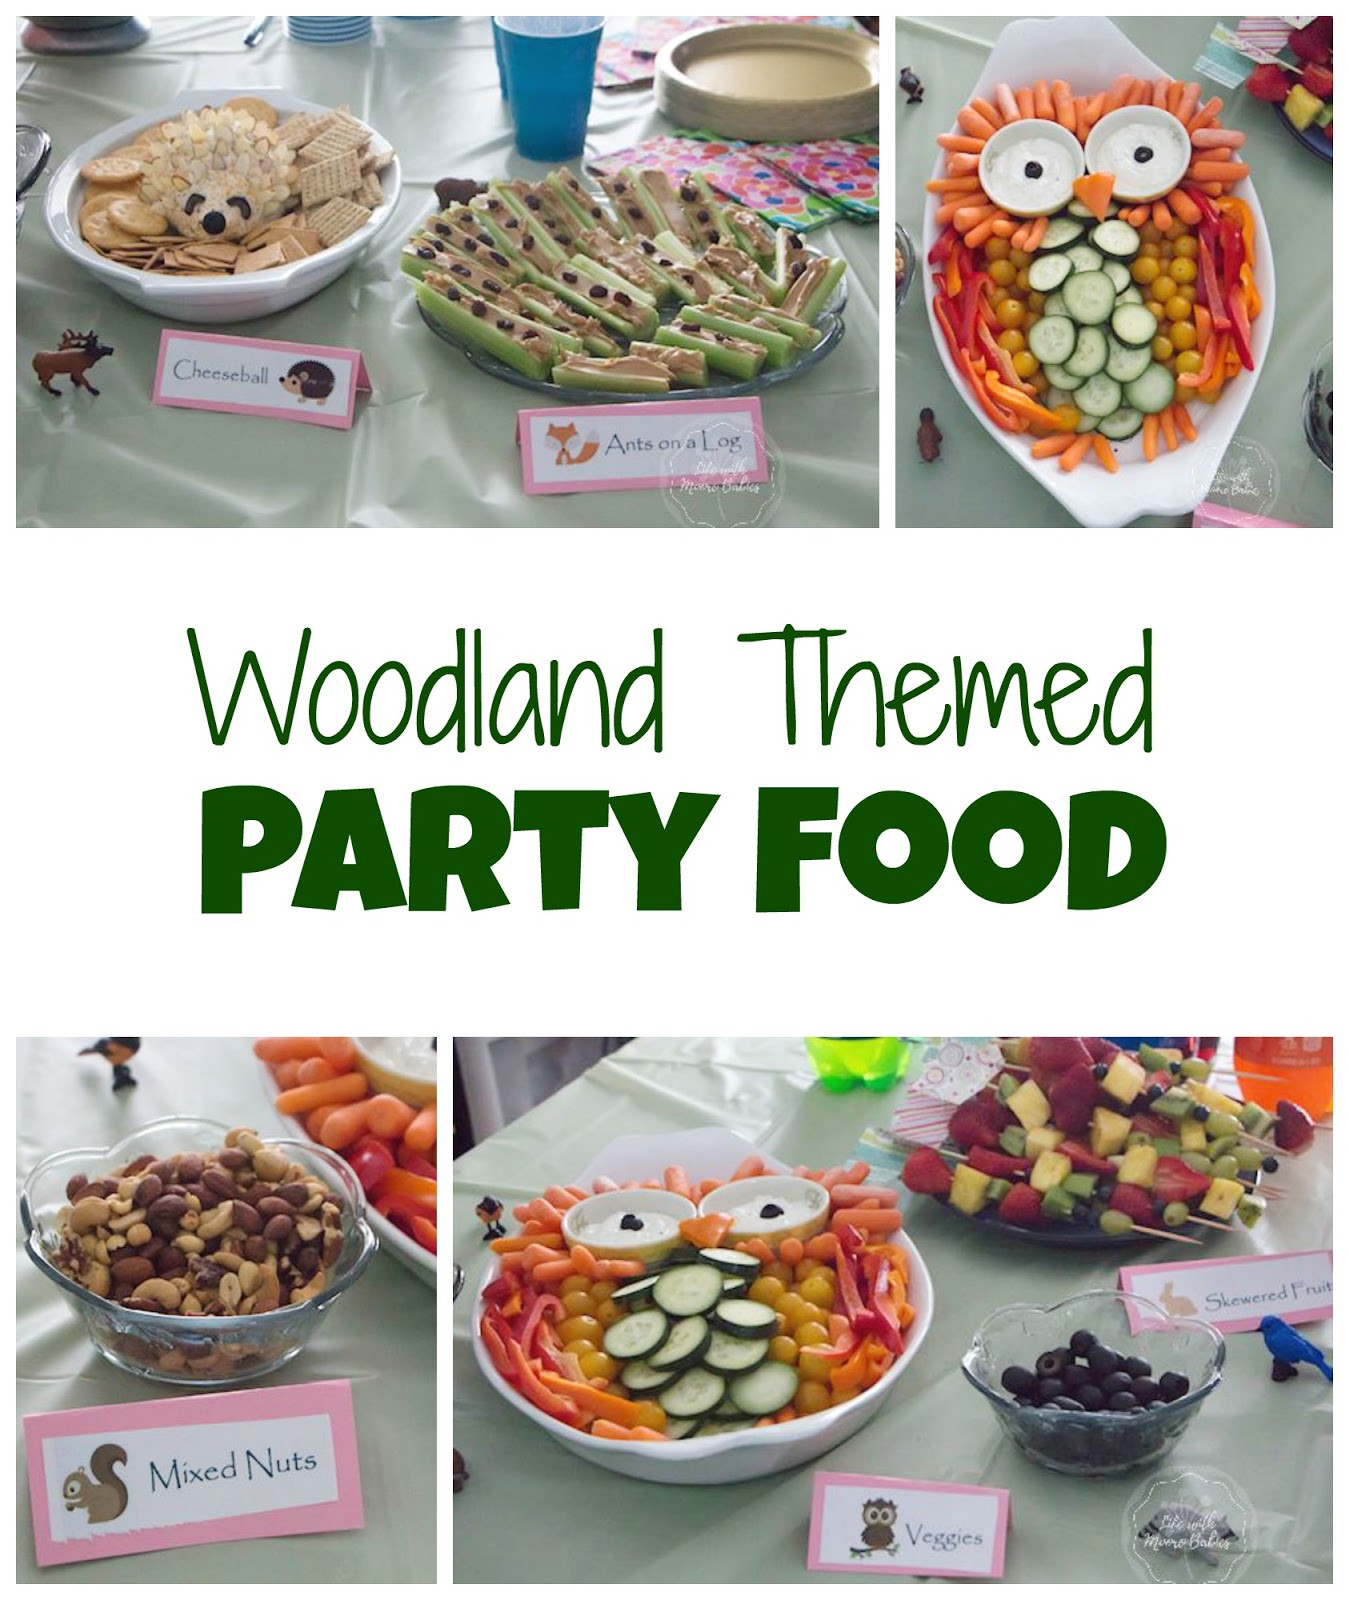 Woodland Party Food Ideas
 Ideas to Host an Adorable Woodland Birthday Party Life